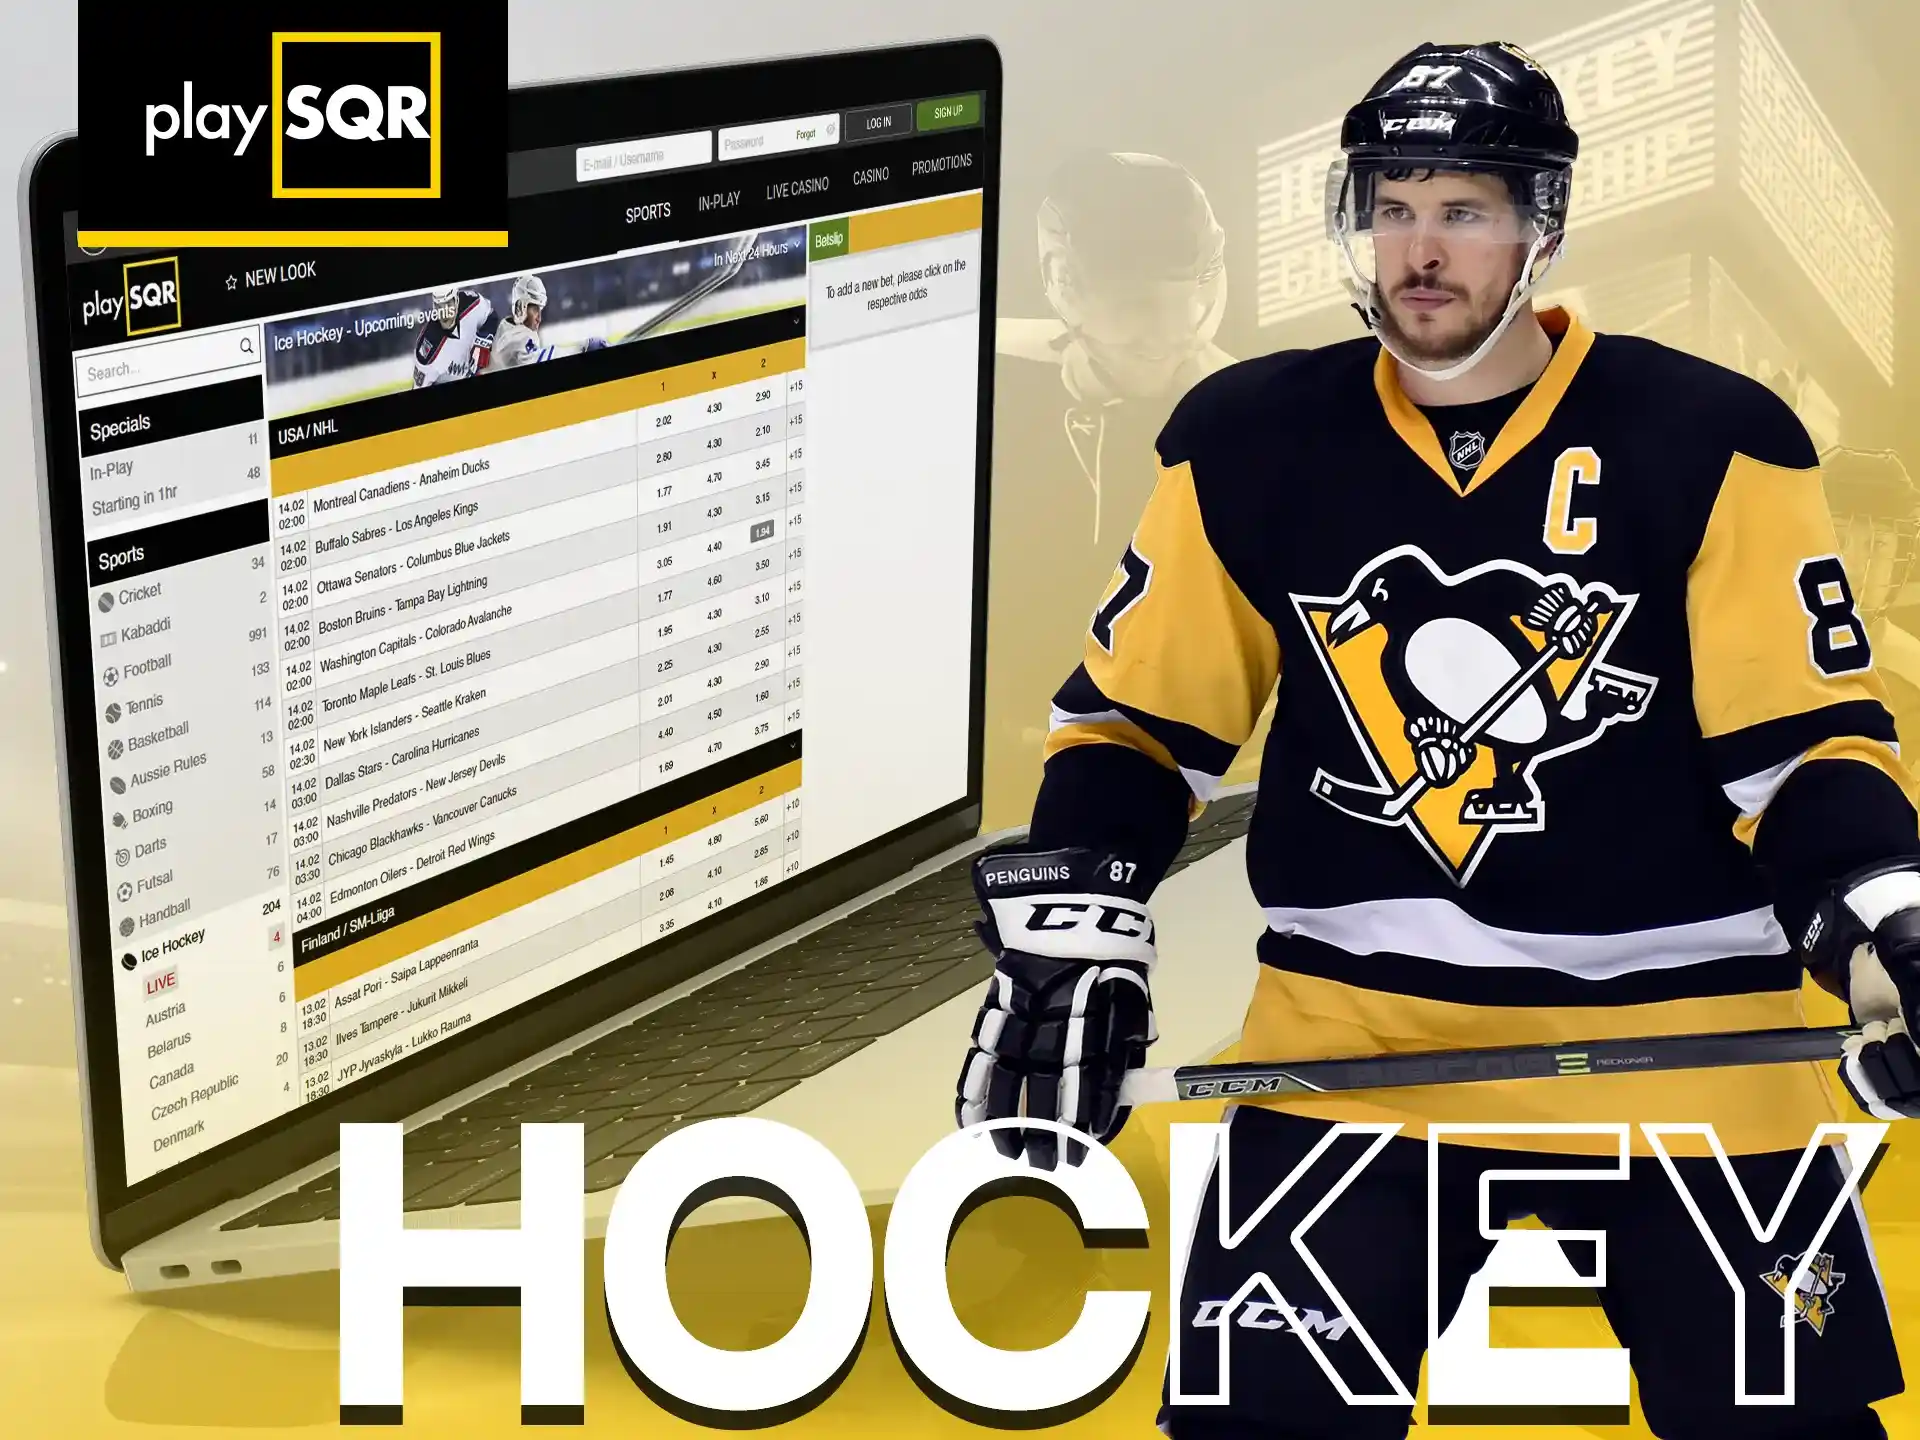 For hockey fans, PlaySQR provides plenty of betting opportunities on your favorite teams.